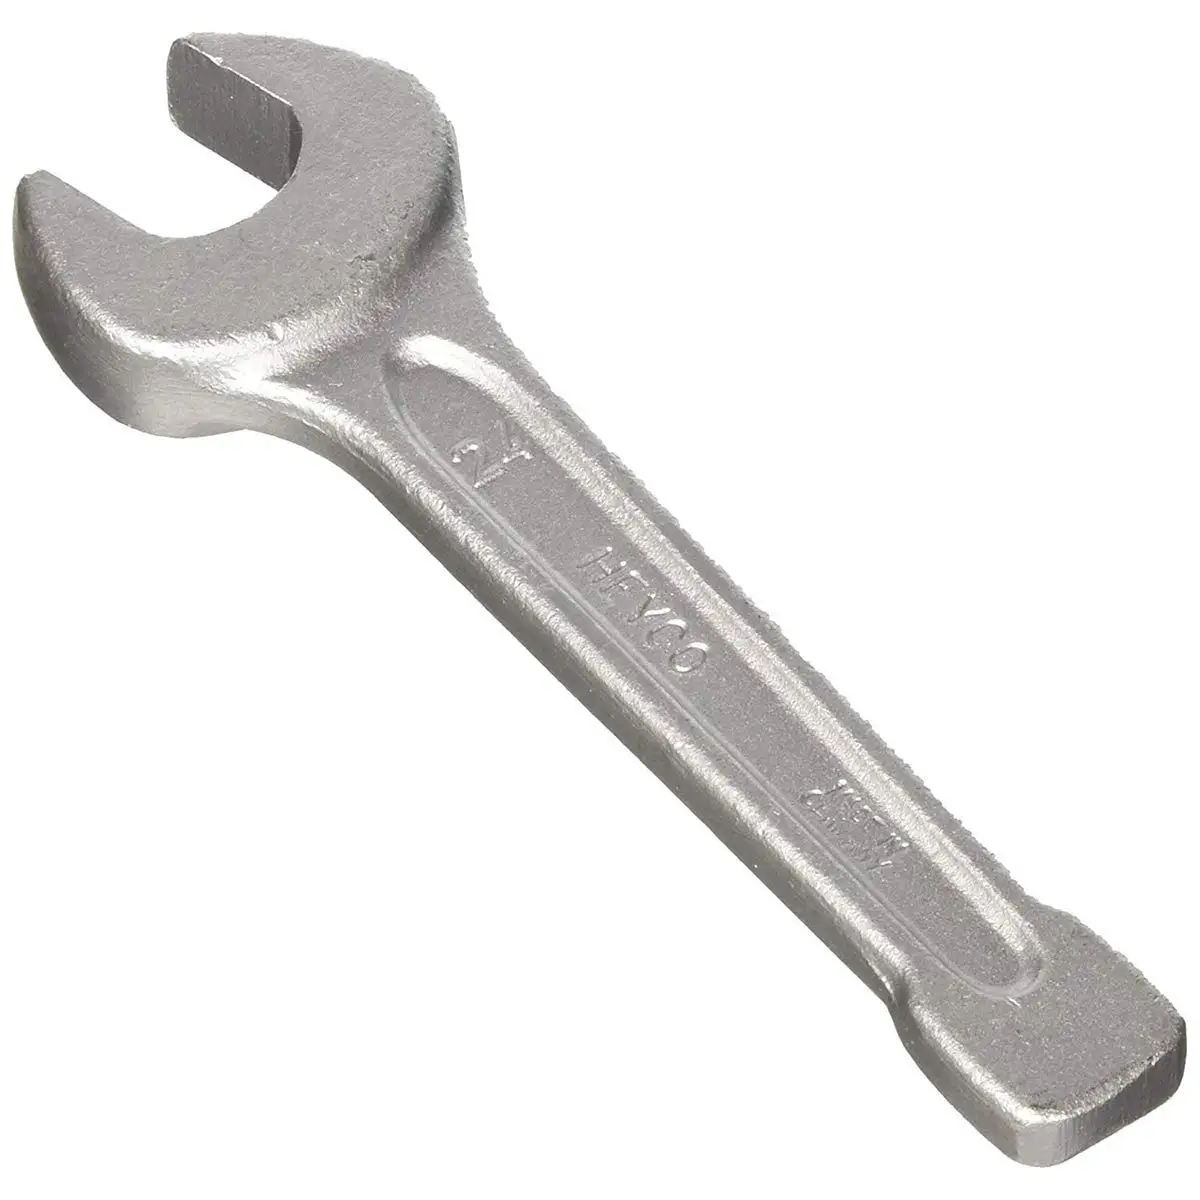 C tools. Wrench, open end, Single head, 2-5/8 in.